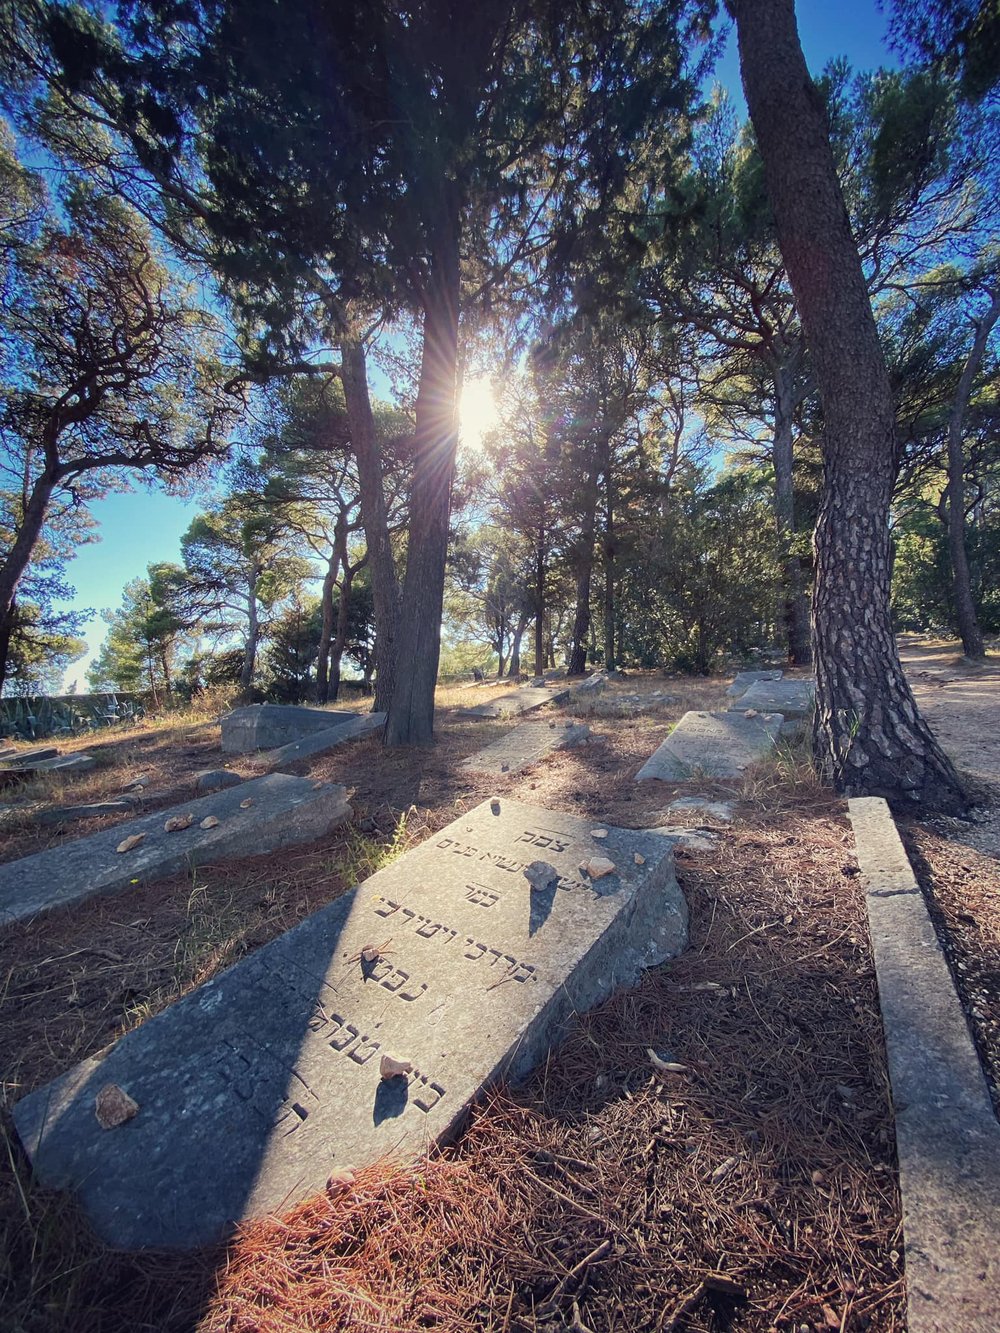  It’s beautiful and peaceful in these piney woods. Old Jewish Cemetery, Split, Croatia. 